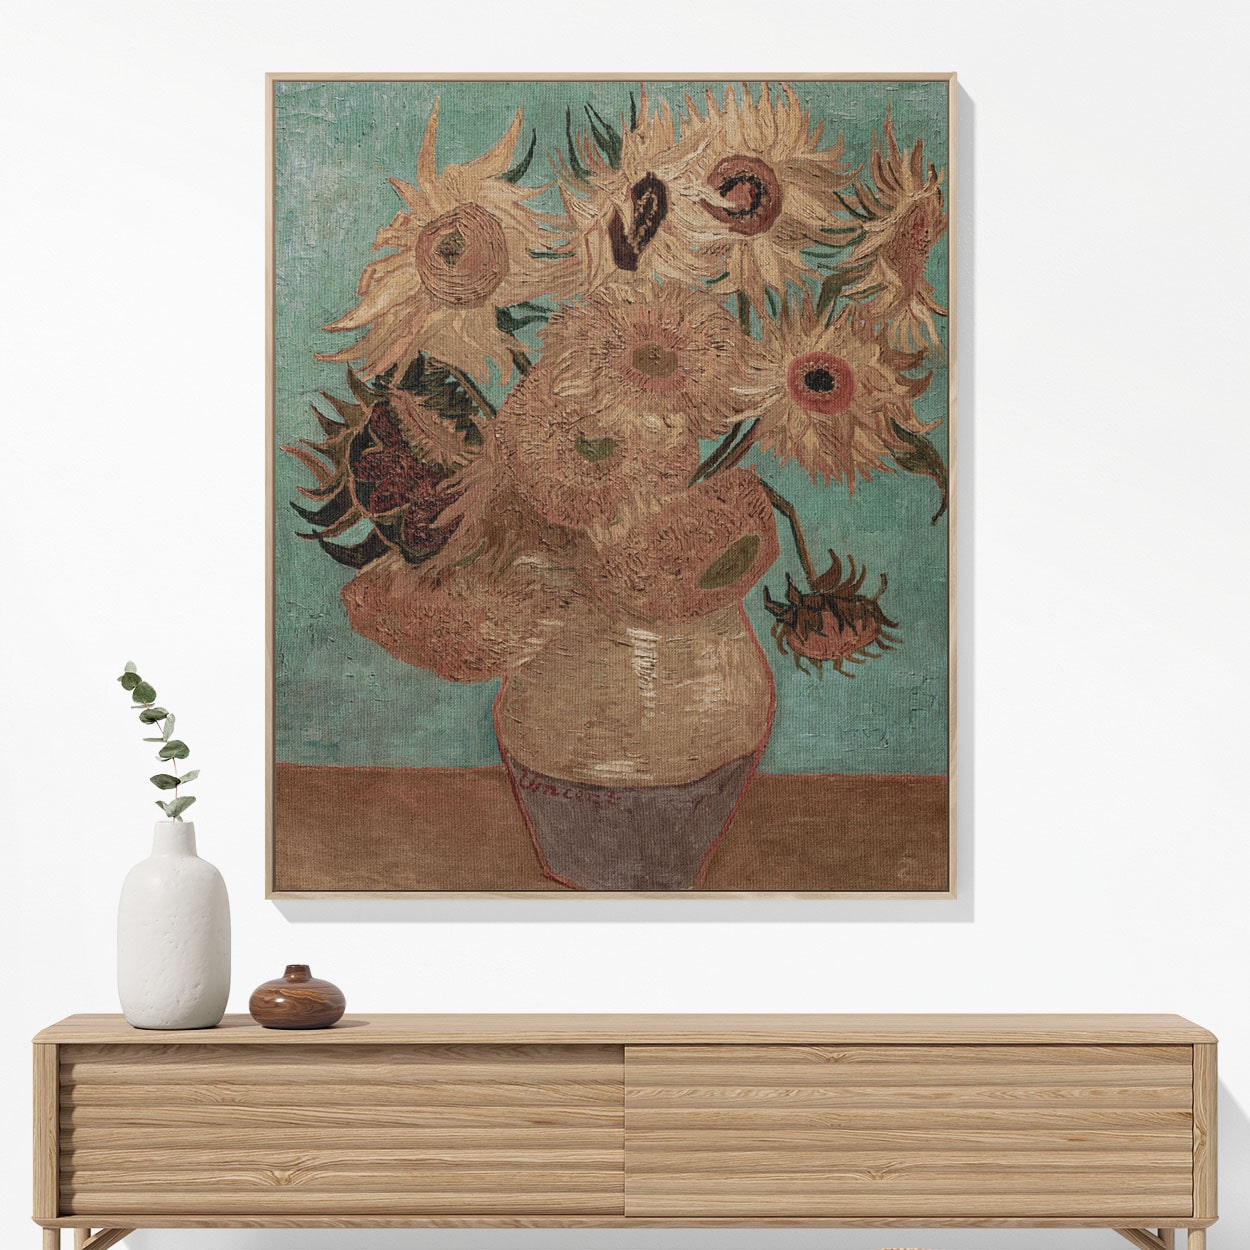 Vase with Flowers Woven Blanket Woven Blanket Hanging on a Wall as Framed Wall Art